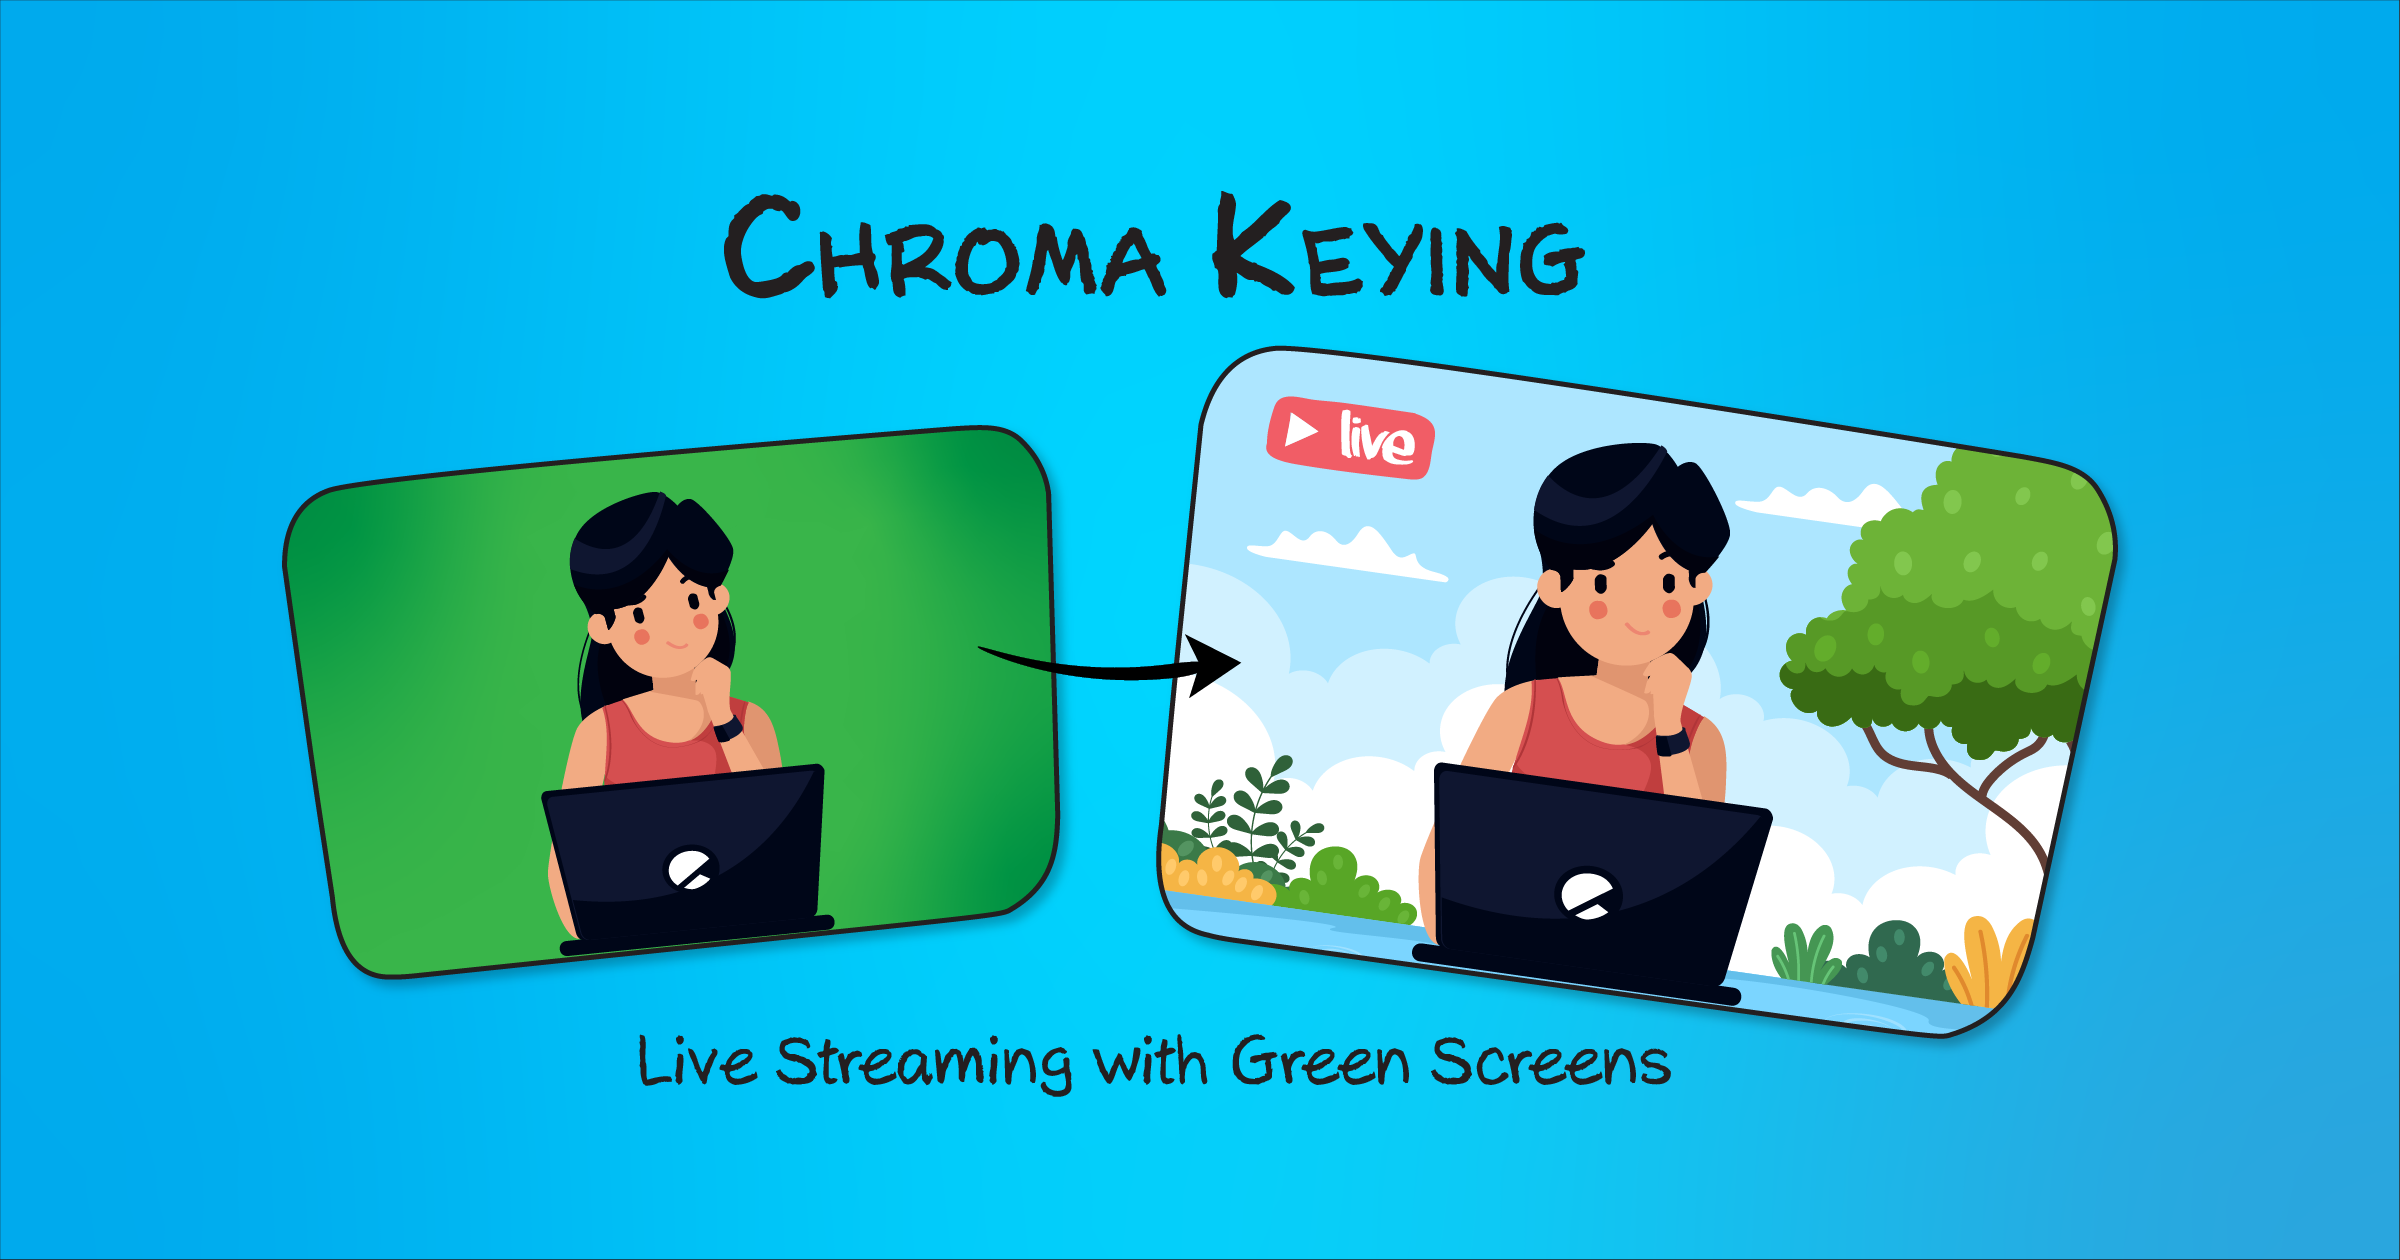 Chroma Keying: Live Streaming with Green Screens